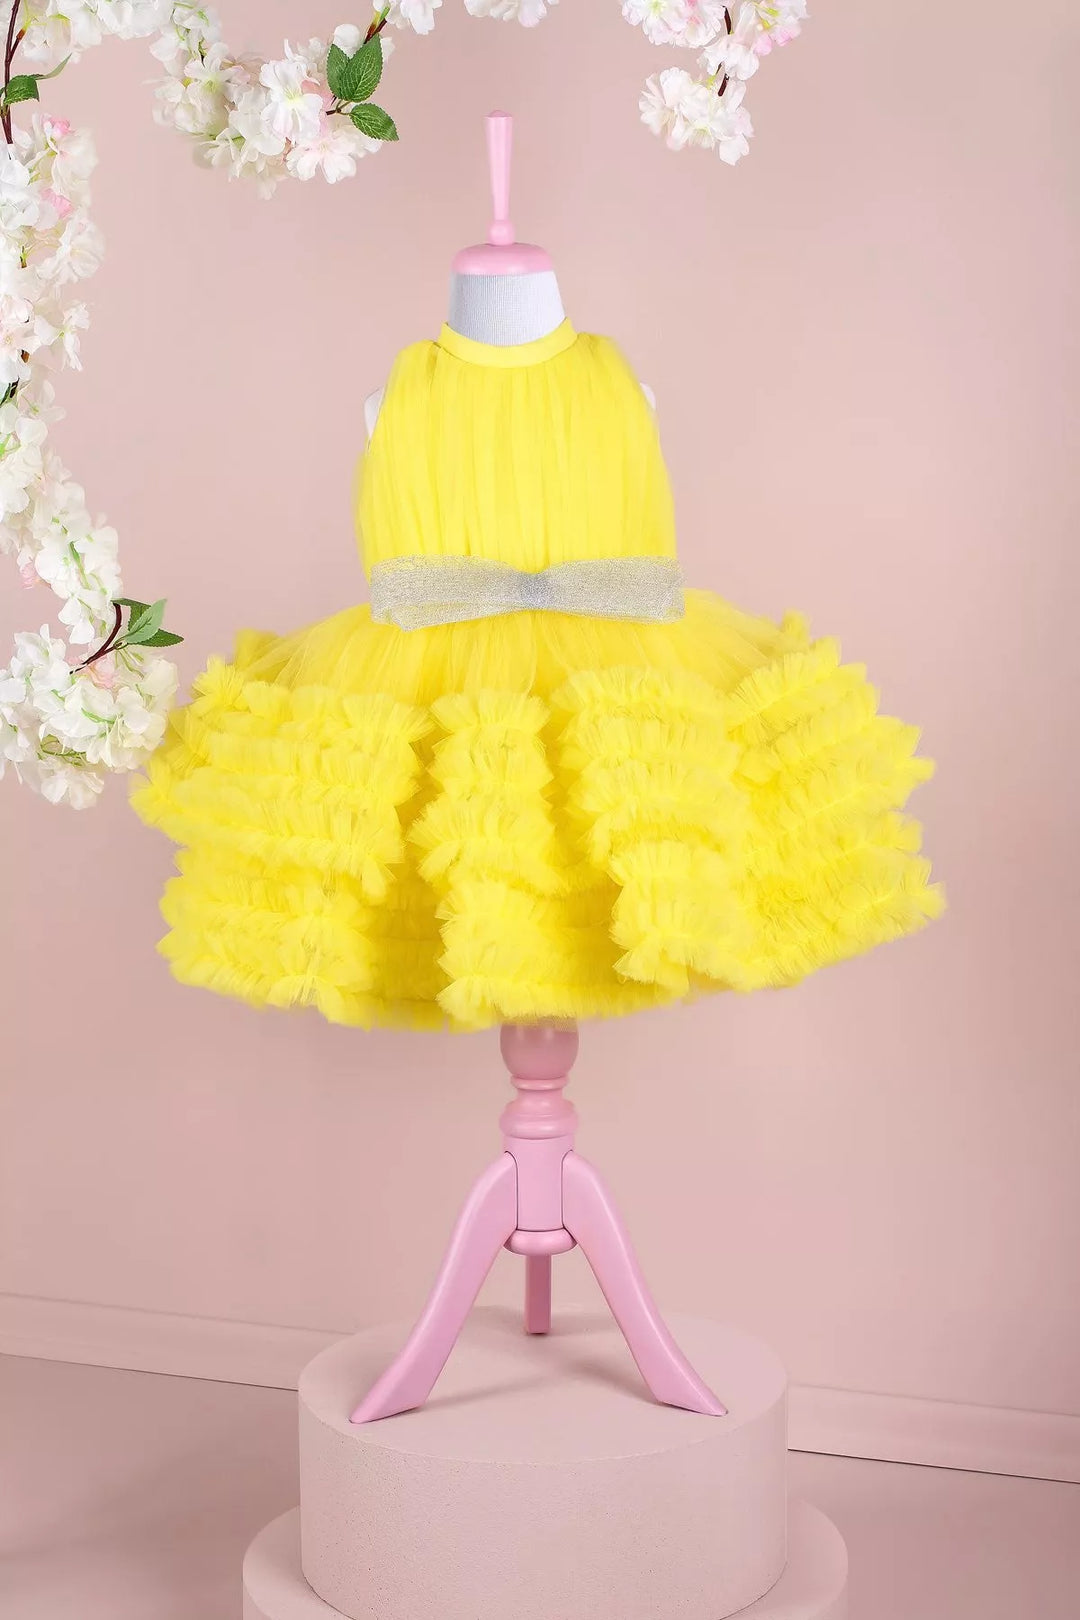 A yellow sleeveless birthday dress that has judge collar, tulle top, shirred tulle knee length skirt, and shiny tulle bow